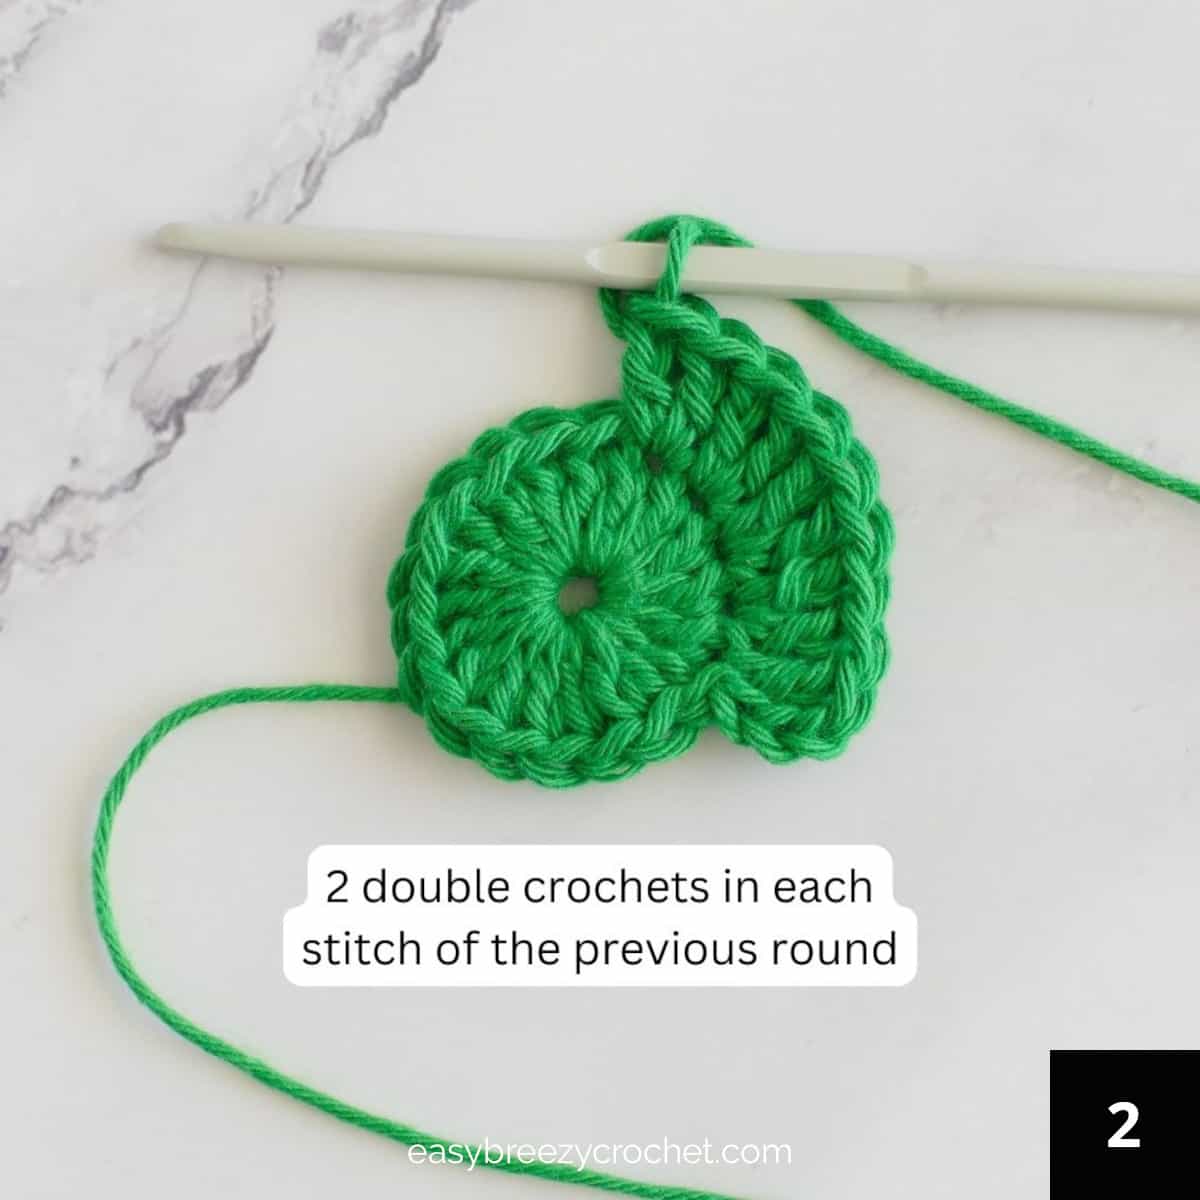 Image showing where stitches should be placed in round 2 of making a crocheted basket.